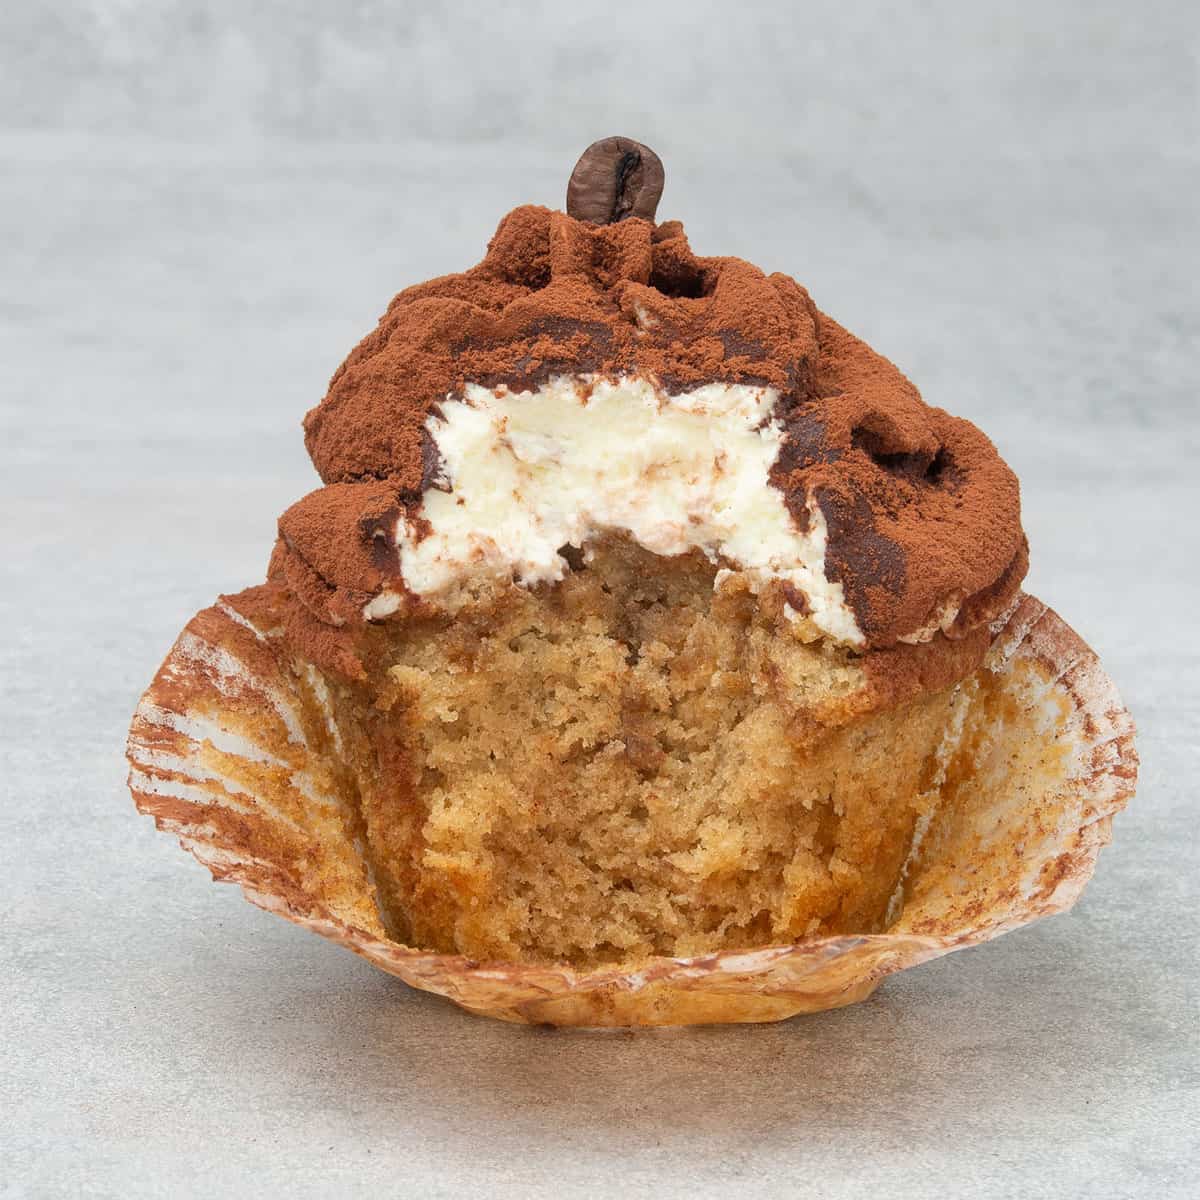 <p>These <a href="https://www.spatuladesserts.com/epic-tiramisu-cupcake/">Tiramisu Cupcakes</a> are a wonderful treat for coffee and dessert enthusiasts. They offer a perfectly balanced flavor in every bite with a <strong>moist coffee cupcake base instead of ladyfingers</strong>. The cupcakes are soaked with coffee to enhance the flavor and then topped with a beautiful mascarpone frosting swirl. As a finishing touch, cocoa powder is sprinkled over the cupcakes to make for a lovely presentation.</p> <p><strong>Go to the recipe: <a href="https://www.spatuladesserts.com/epic-tiramisu-cupcake/">Tiramisu Cupcakes</a></strong></p> <p><strong>For more coffee dessert recipes visit the original <a href="https://www.spatuladesserts.com/coffee-desserts/">Coffee Desserts</a> article at <a href="https://www.spatuladesserts.com/">Spatula Desserts</a>.</strong></p>